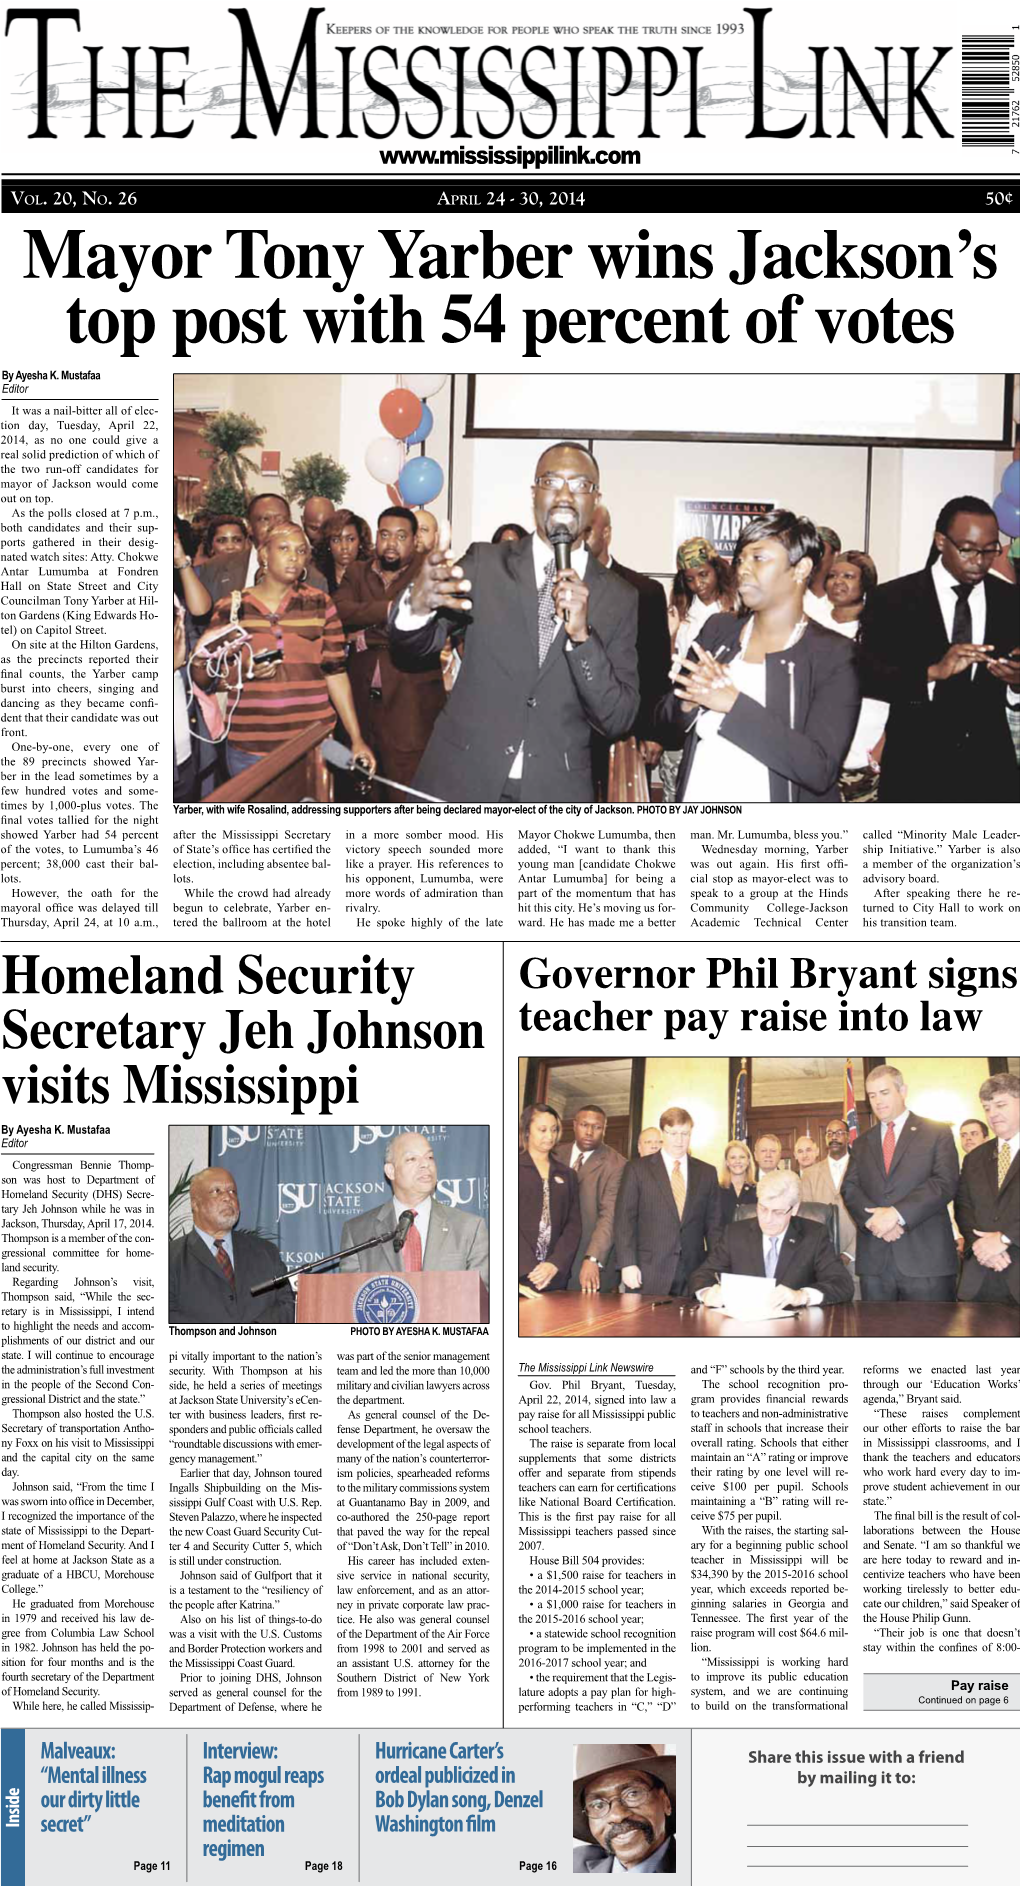 Mayor Tony Yarber Wins Jackson's Top Post with 54 Percent of Votes